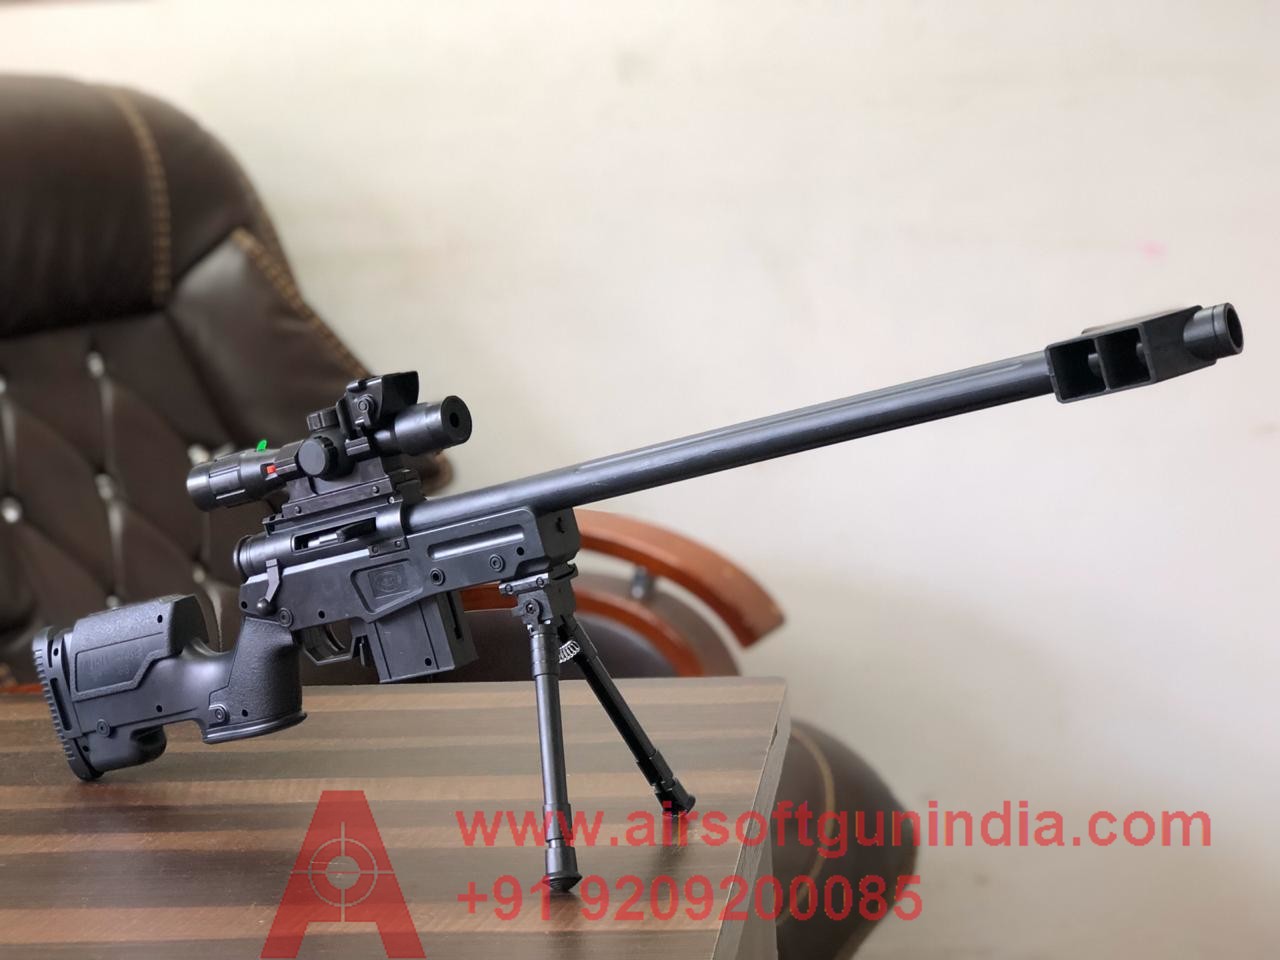 Toy Sniper Rifle By Airsoft Gun India